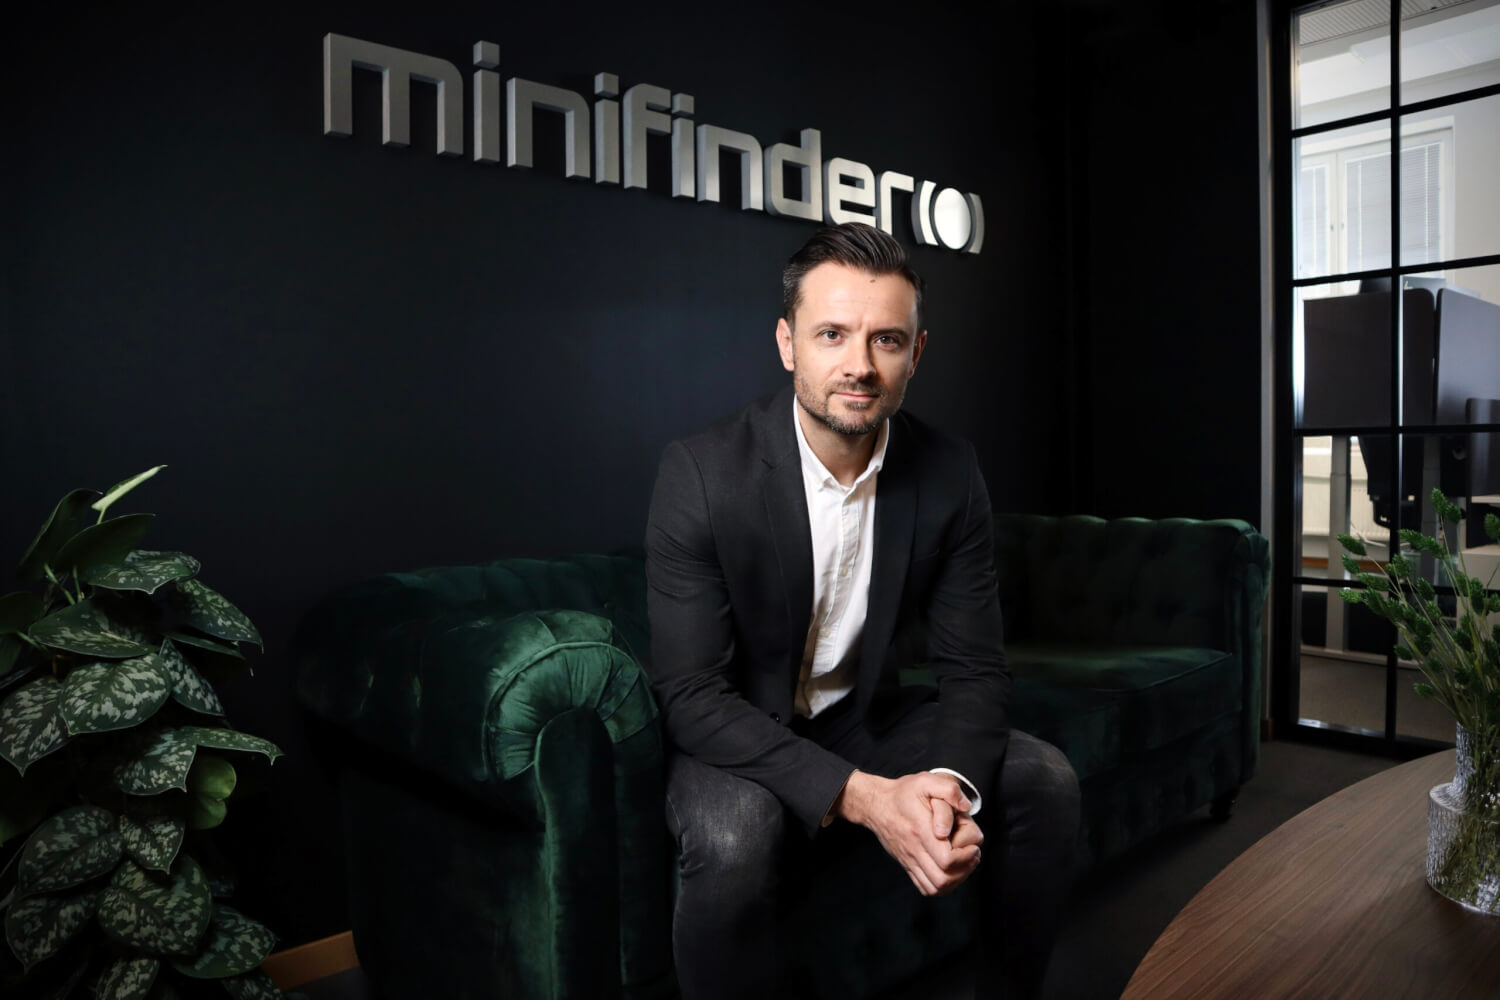 Tele2 IoT highlights MiniFinder's success in a new article